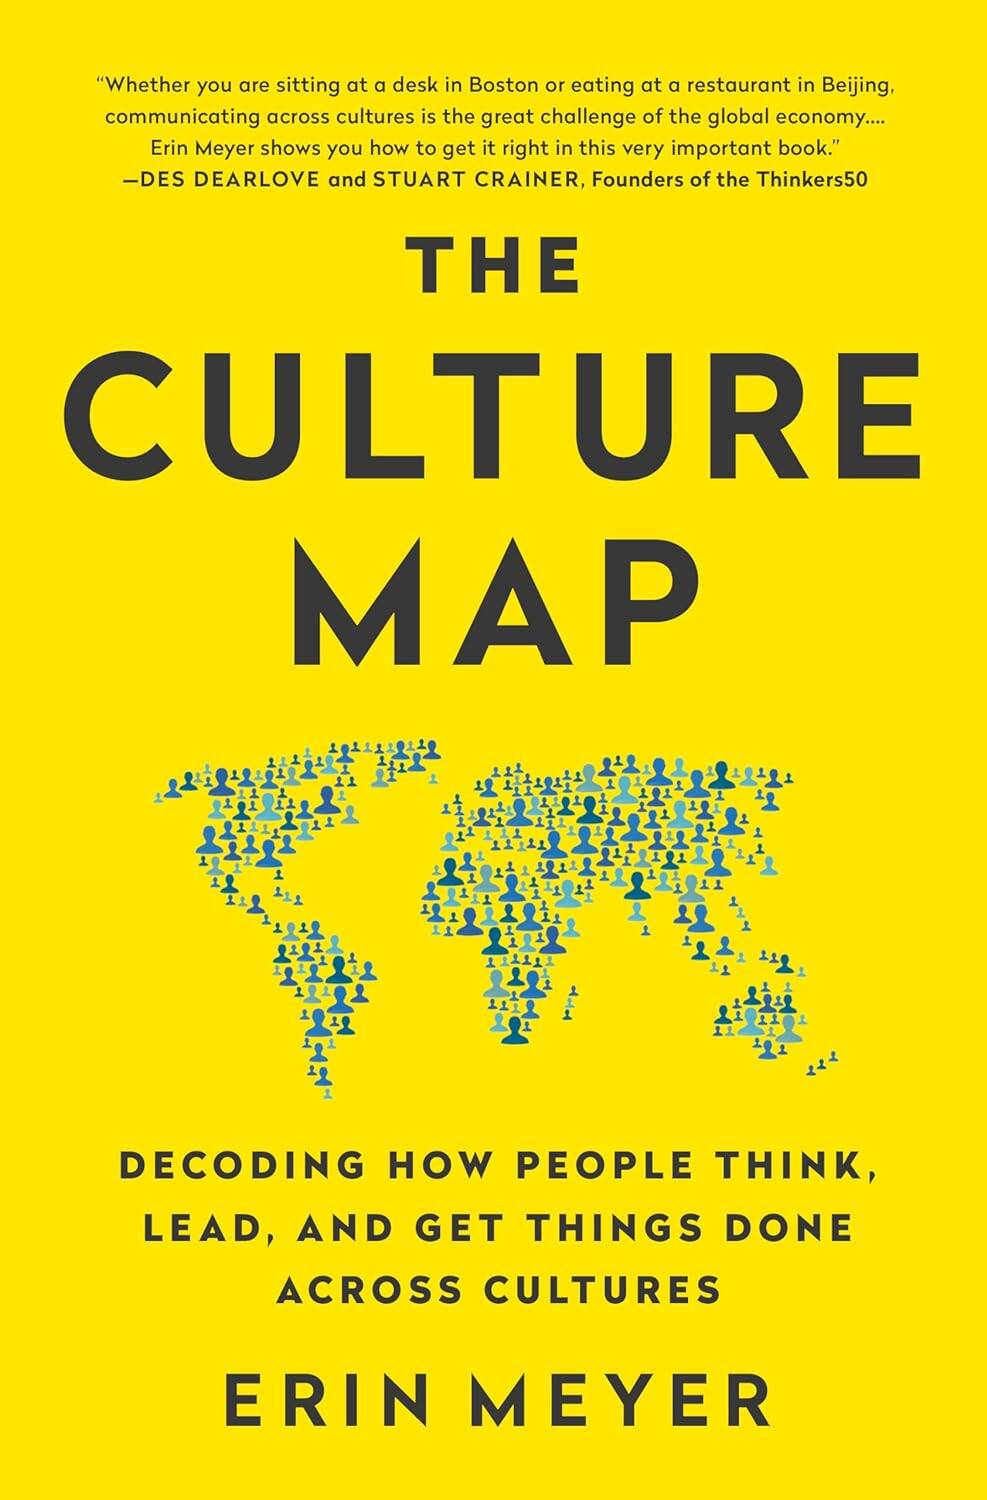 The Culture Map (Erin Meyer)    ( ) /   